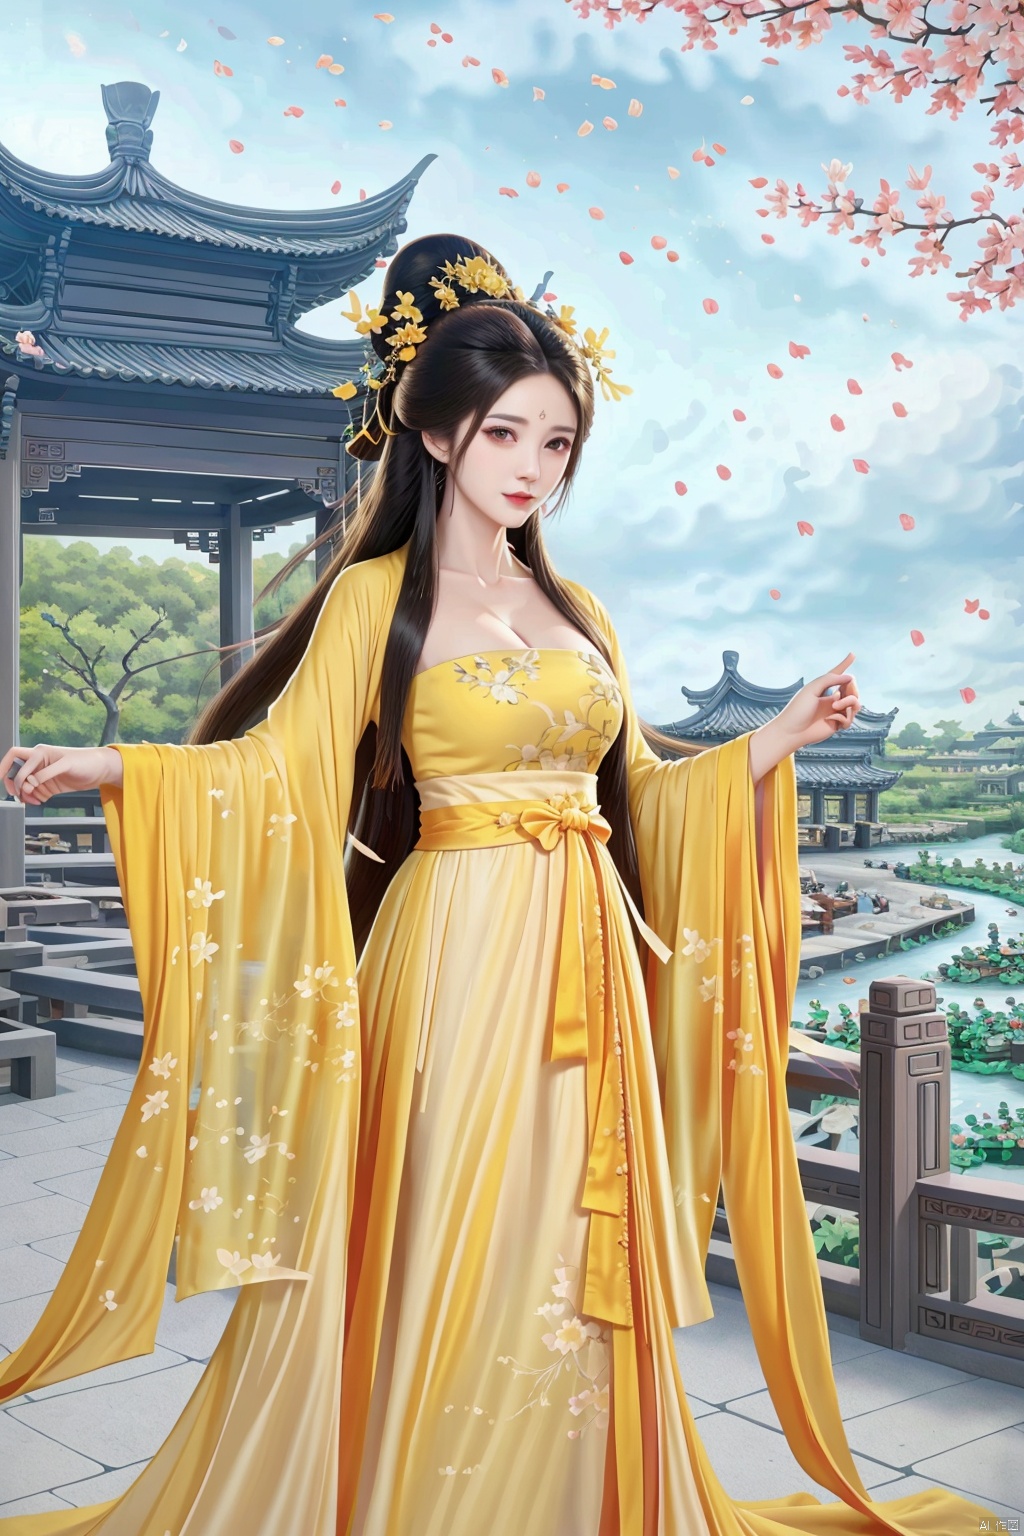  (Best quality, masterpiece, realistic, 4k),A girl,light yellow Chinese style dress,Hanfu,Medium breast,Ancient architecture, petals falling, spring, little smile,outdoor